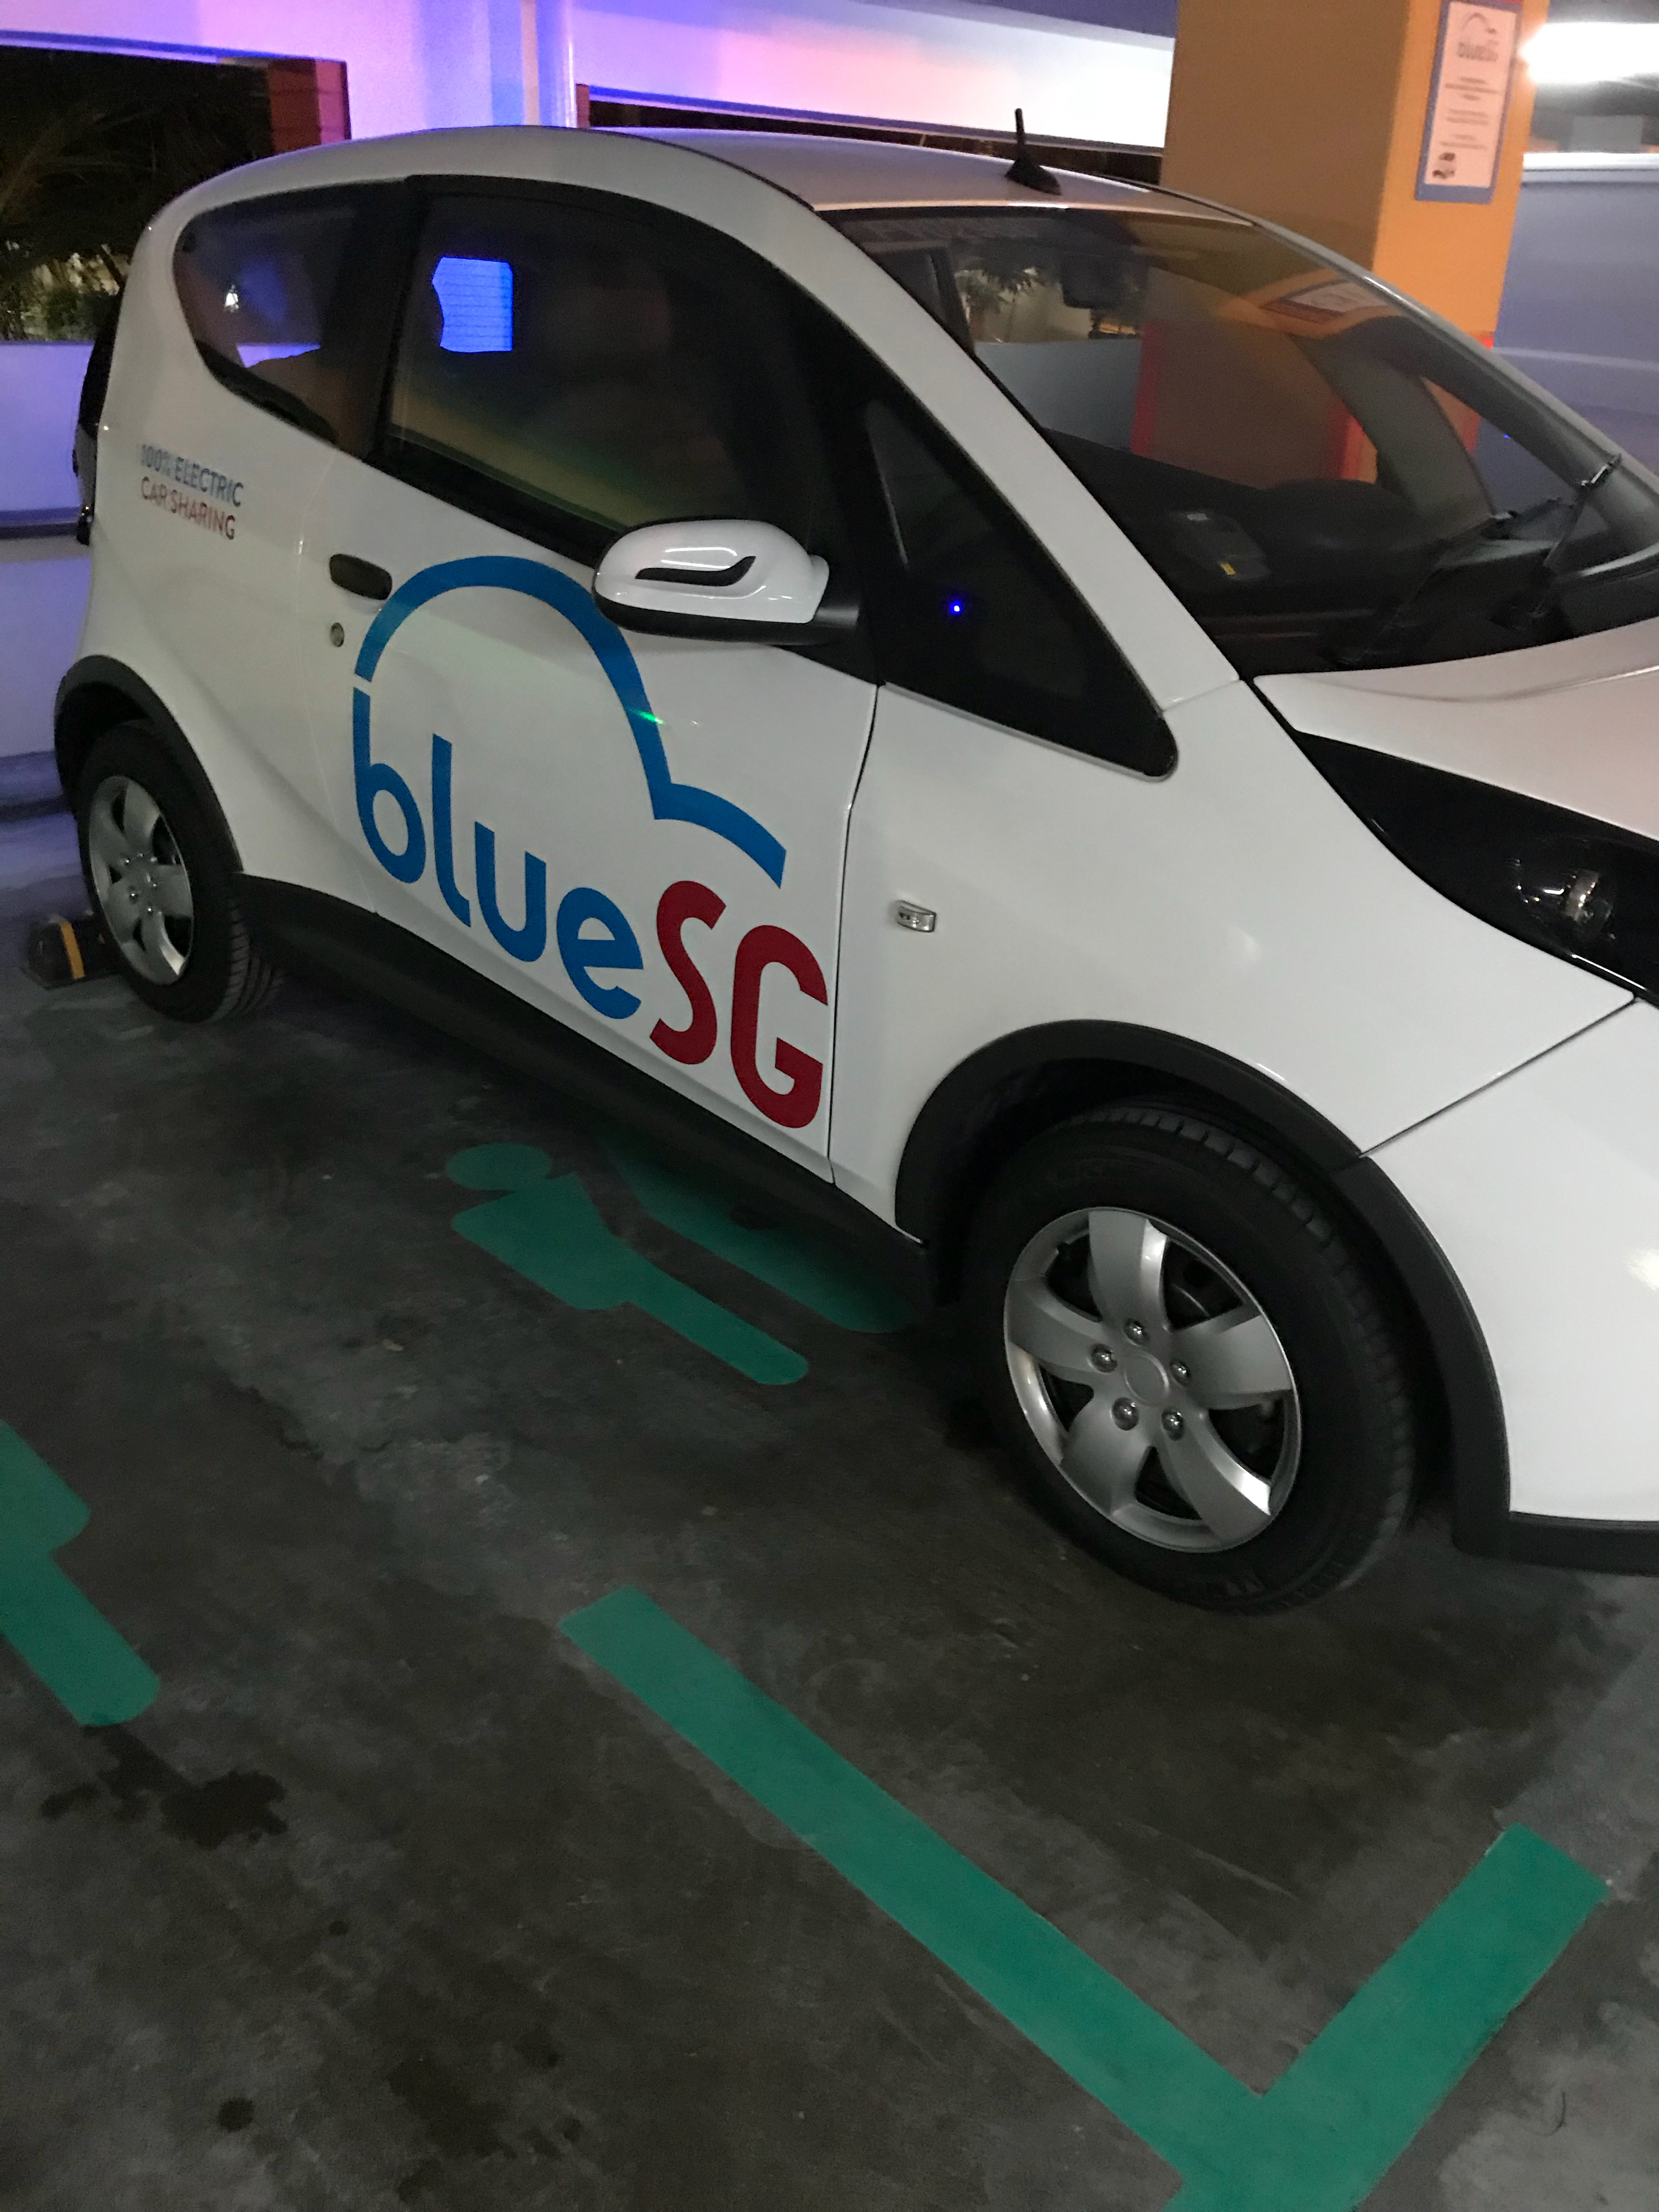 BlueSG: Reducing the Need to Own a Car?